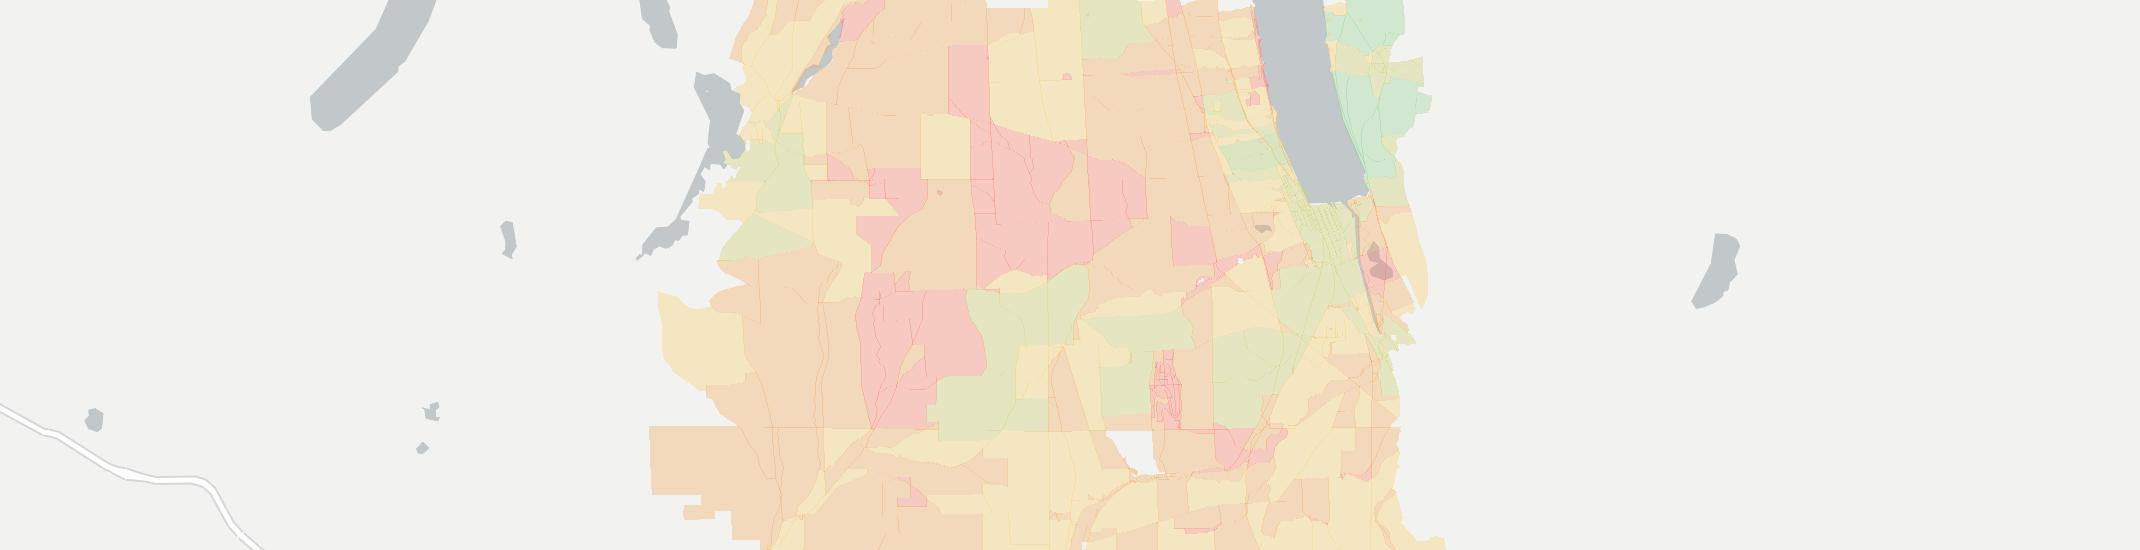 Watkins Glen Internet Competition Map. Click for interactive map.